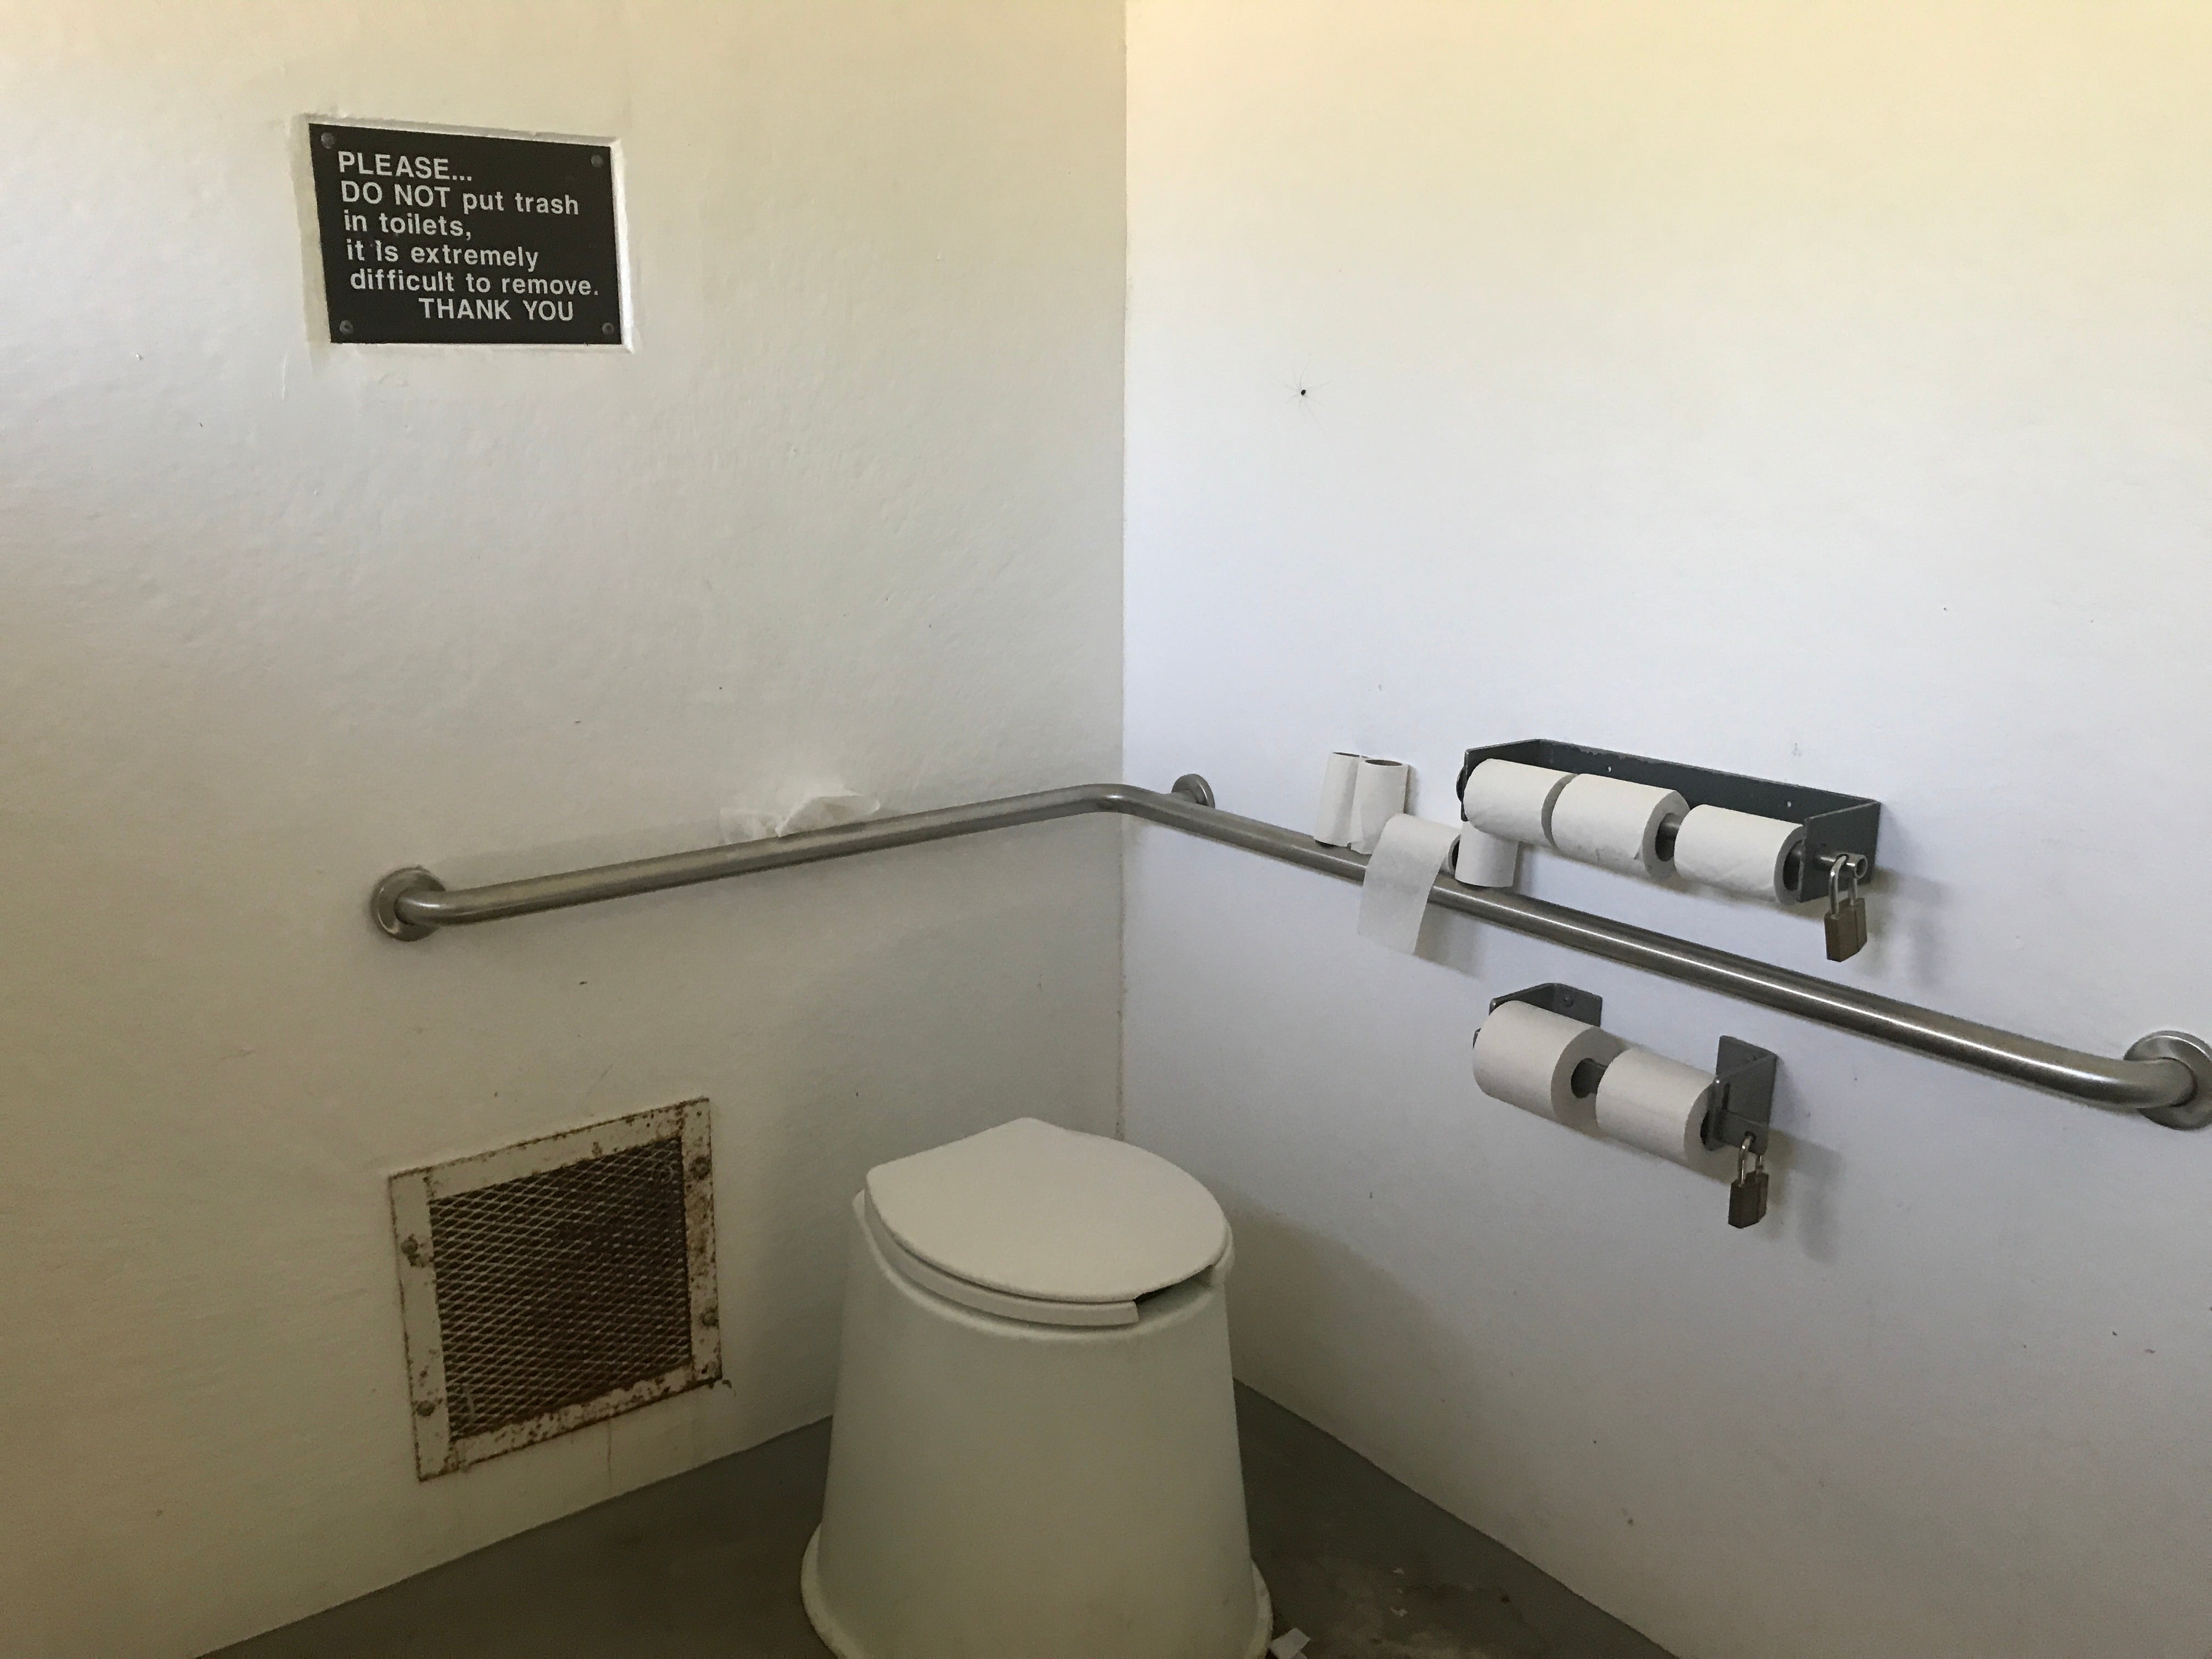 Inside the Pit Toilets